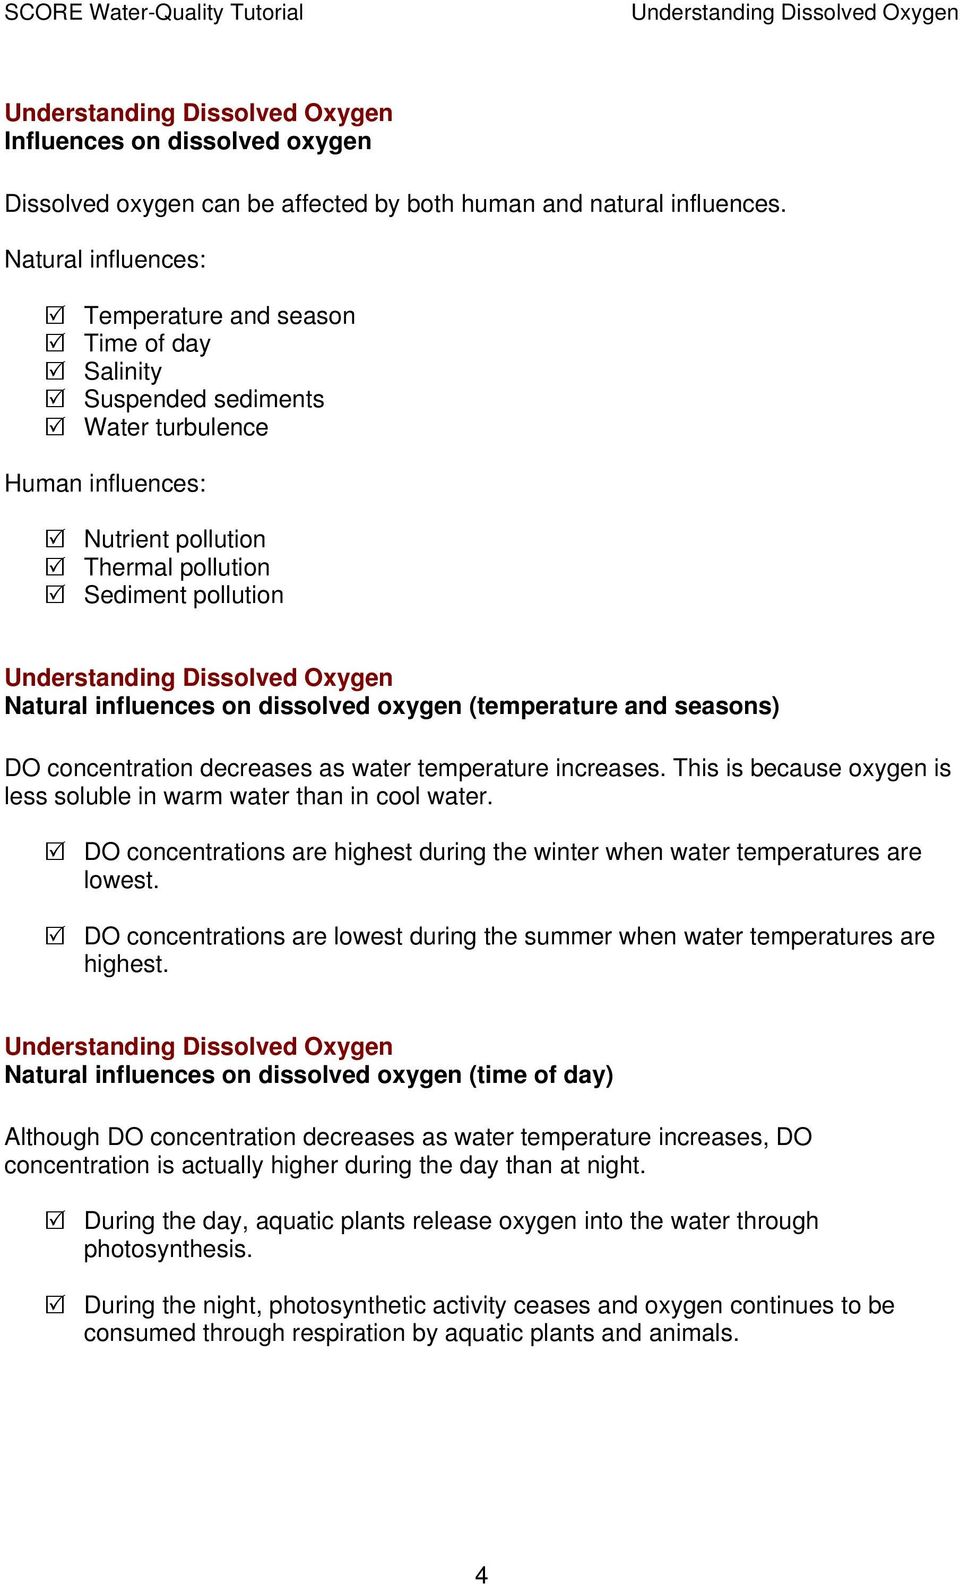 dissolved oxygen (temperature and seasons) DO concentration decreases as water temperature increases. This is because oxygen is less soluble in warm water than in cool water.